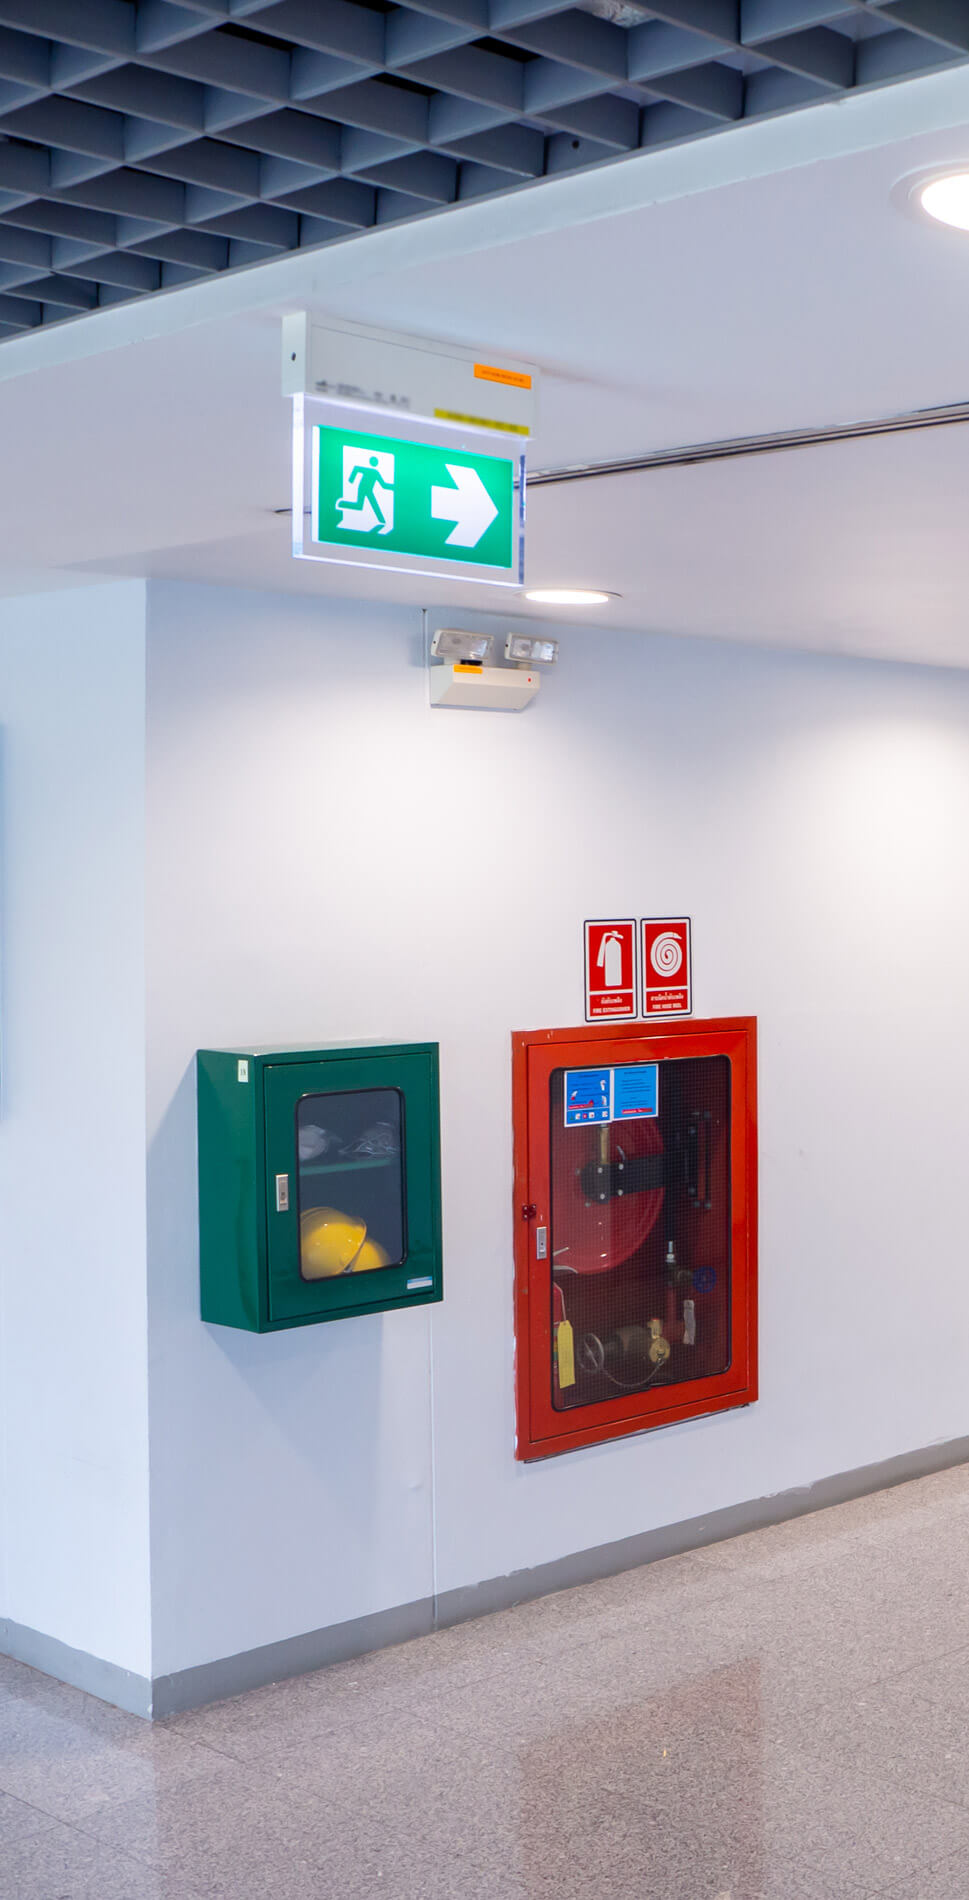 Fire alarm maintainence in Hertfordshire